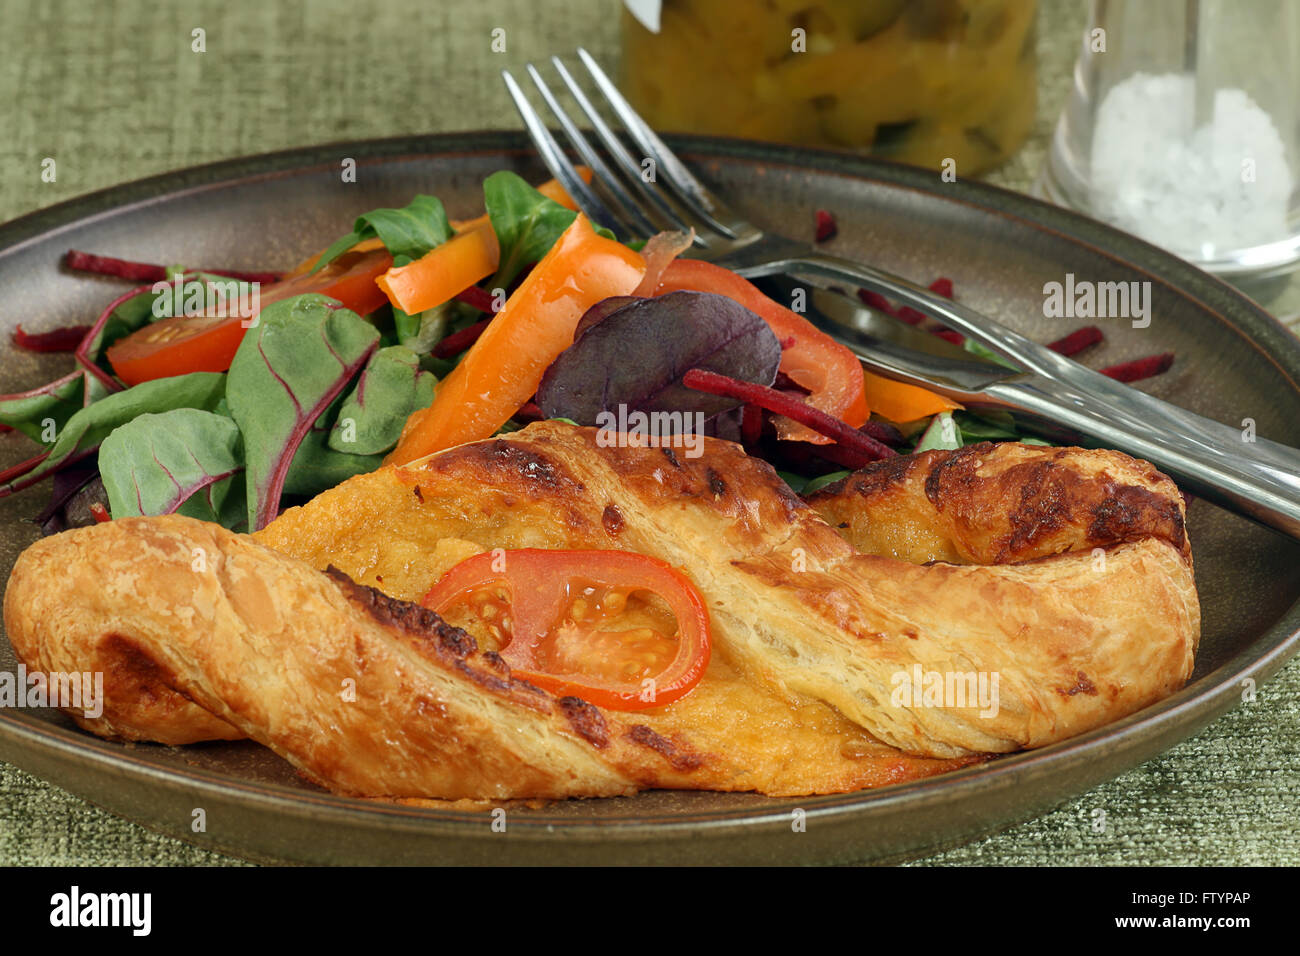 baked cheese pastry with mixed salad leaves Stock Photo